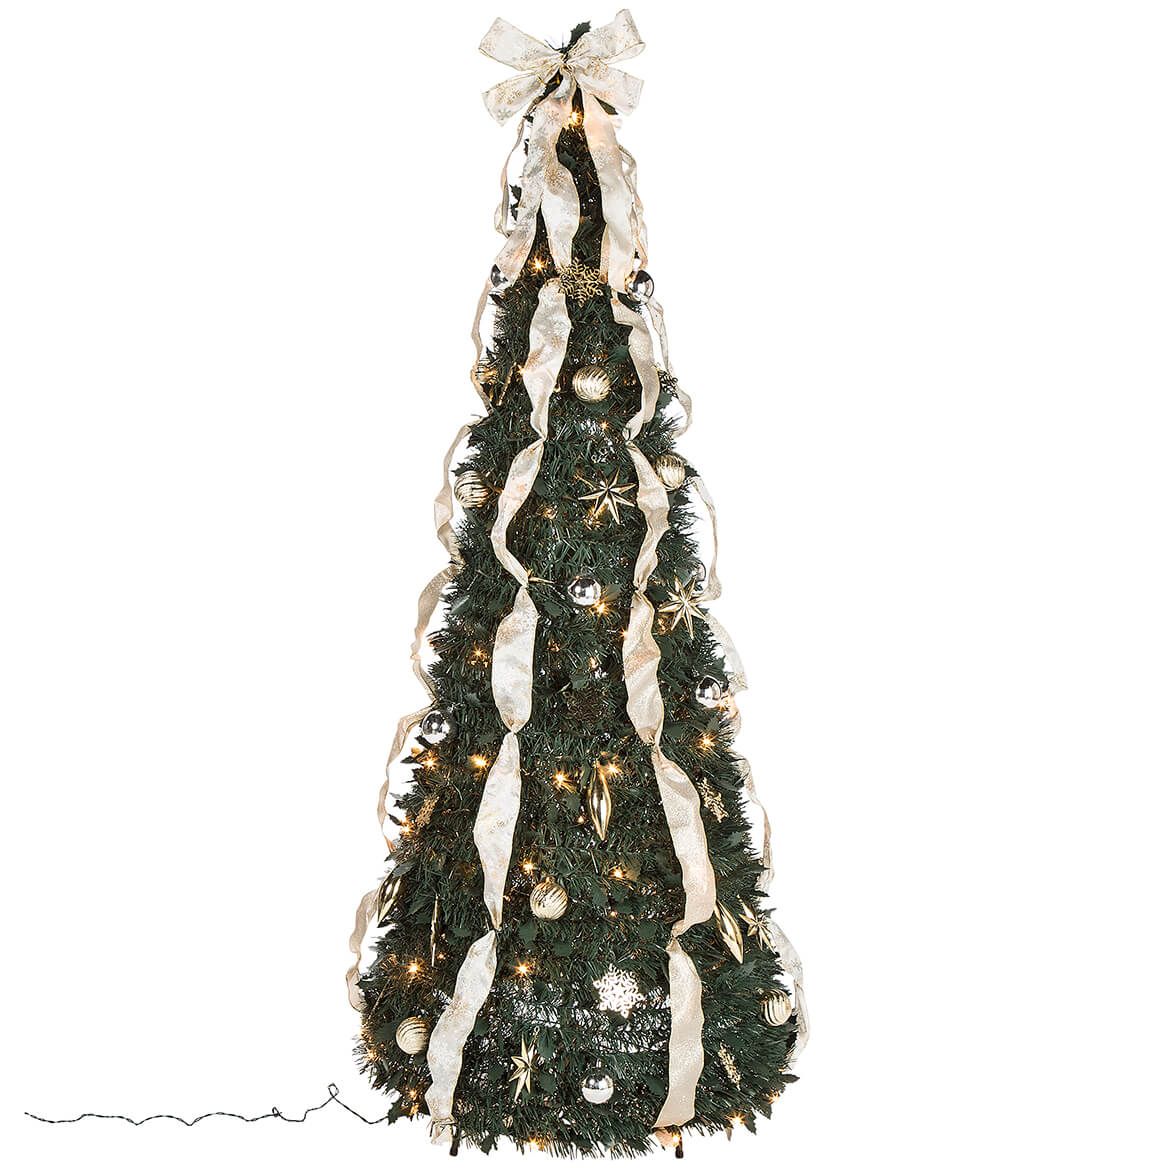 6' Silver & Gold Pull-Up Tree by Holiday Peak™     XL + '-' + 368087